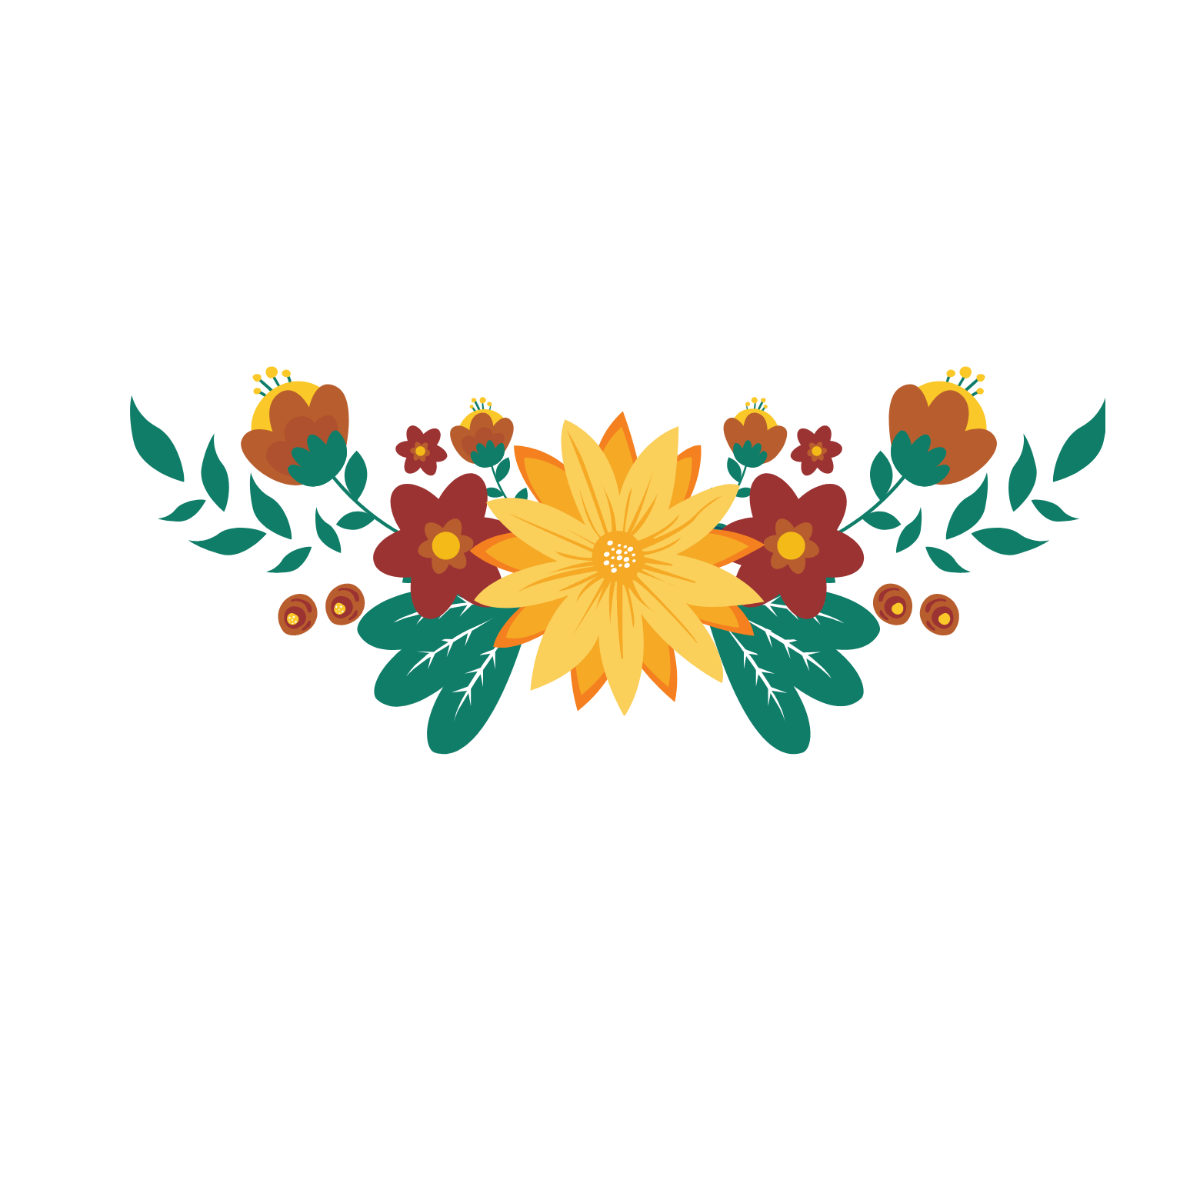 Free Vintage Floral Ornament Vector Template